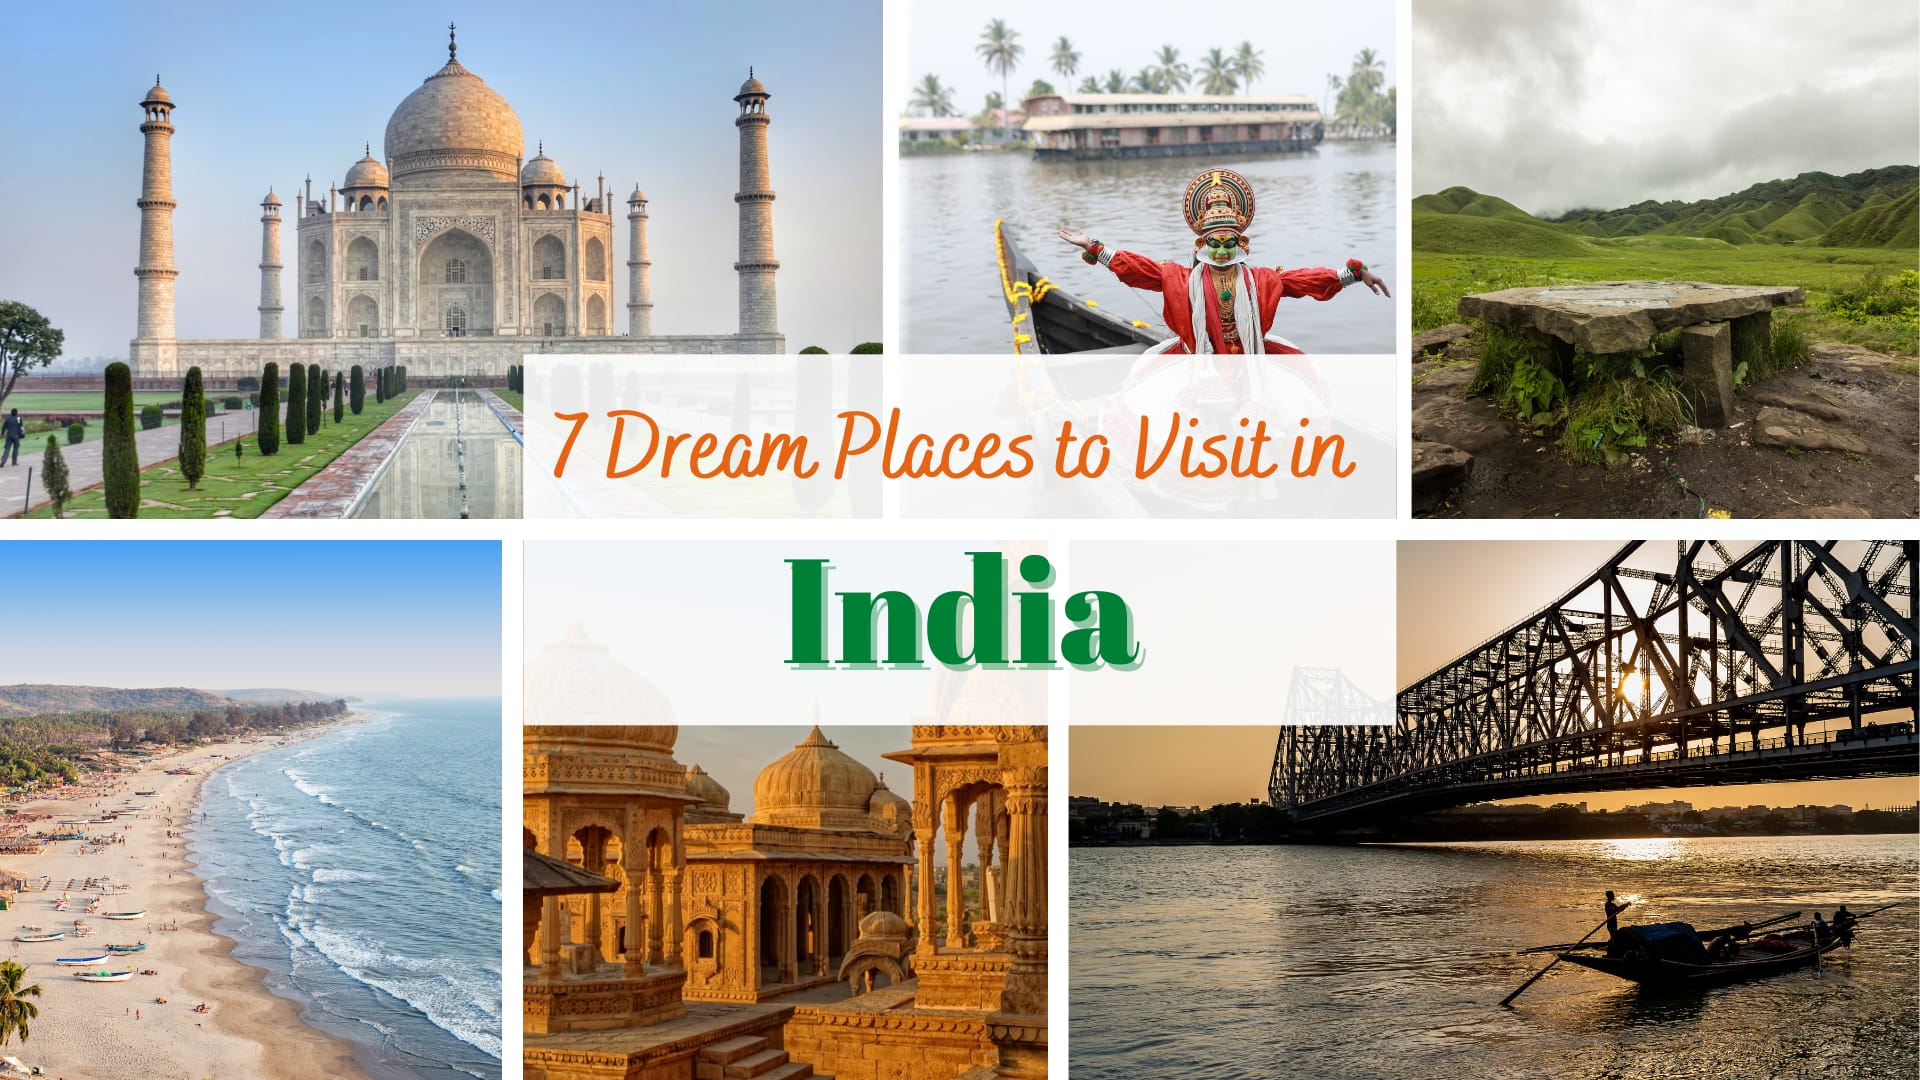 7 Dream Places to Visit in India